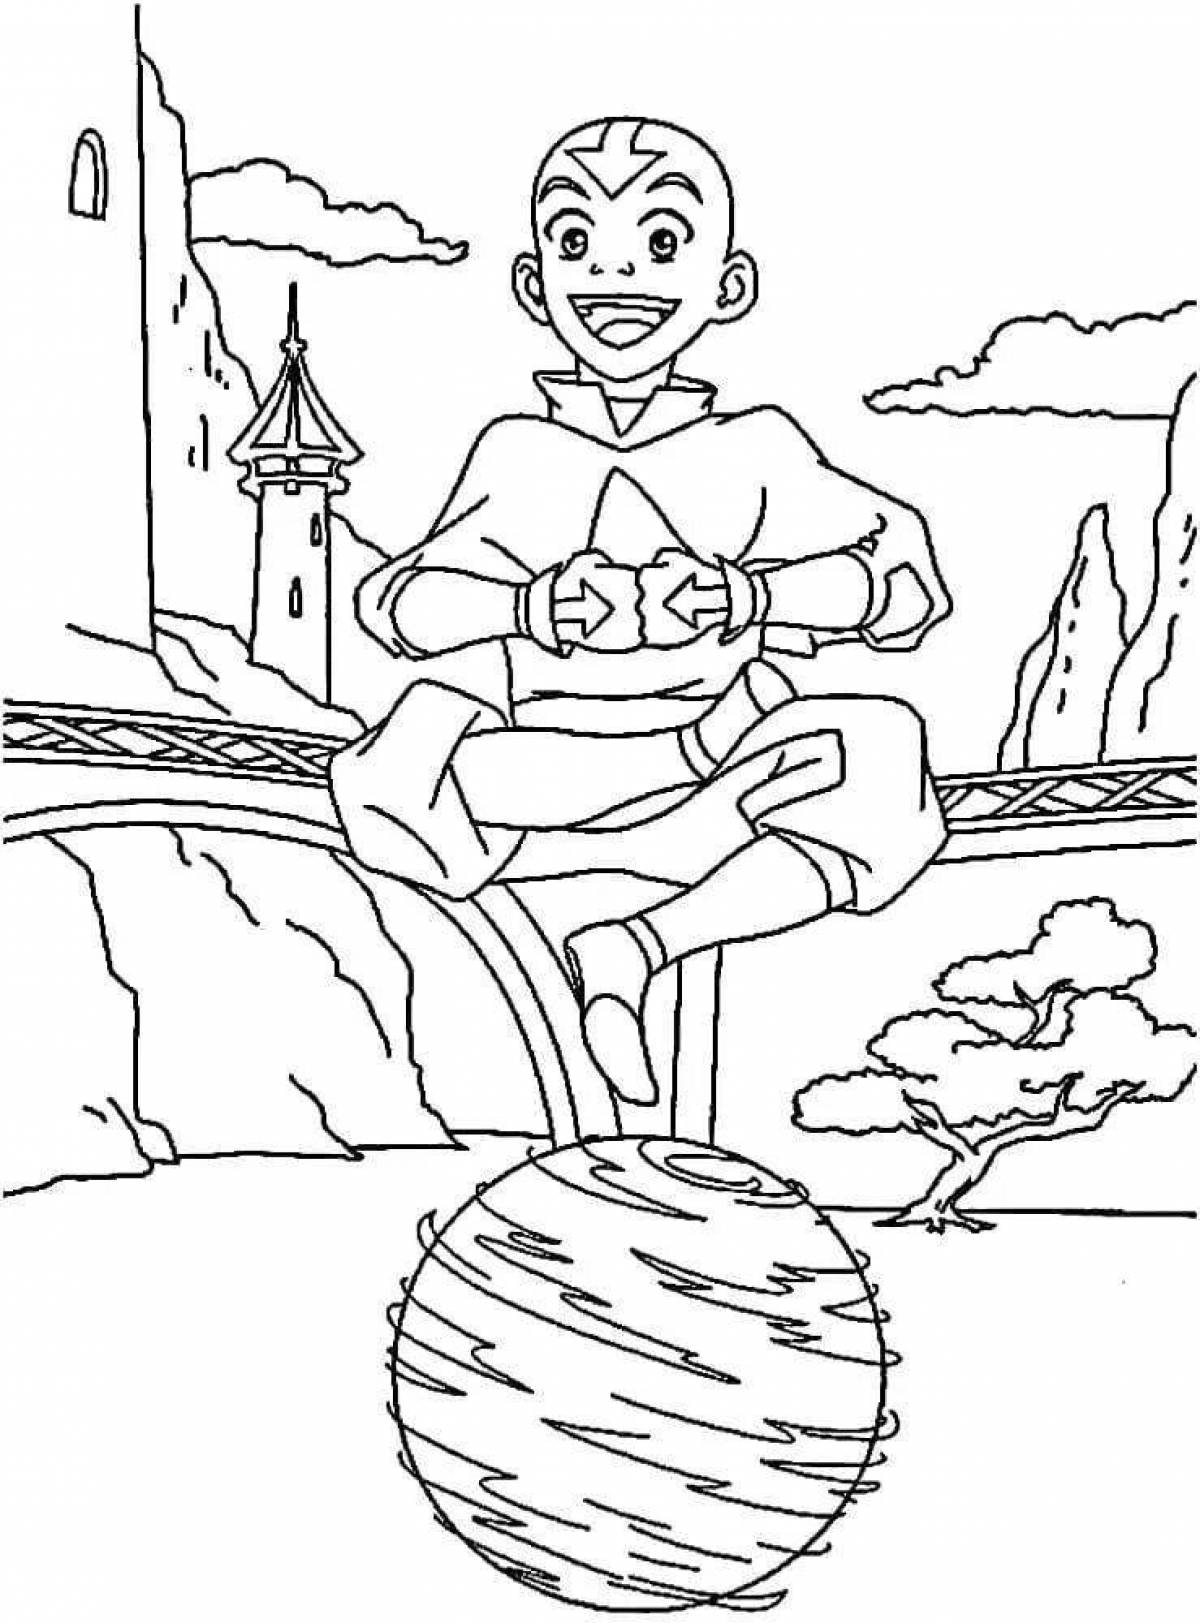 Aang's avatar coloring page